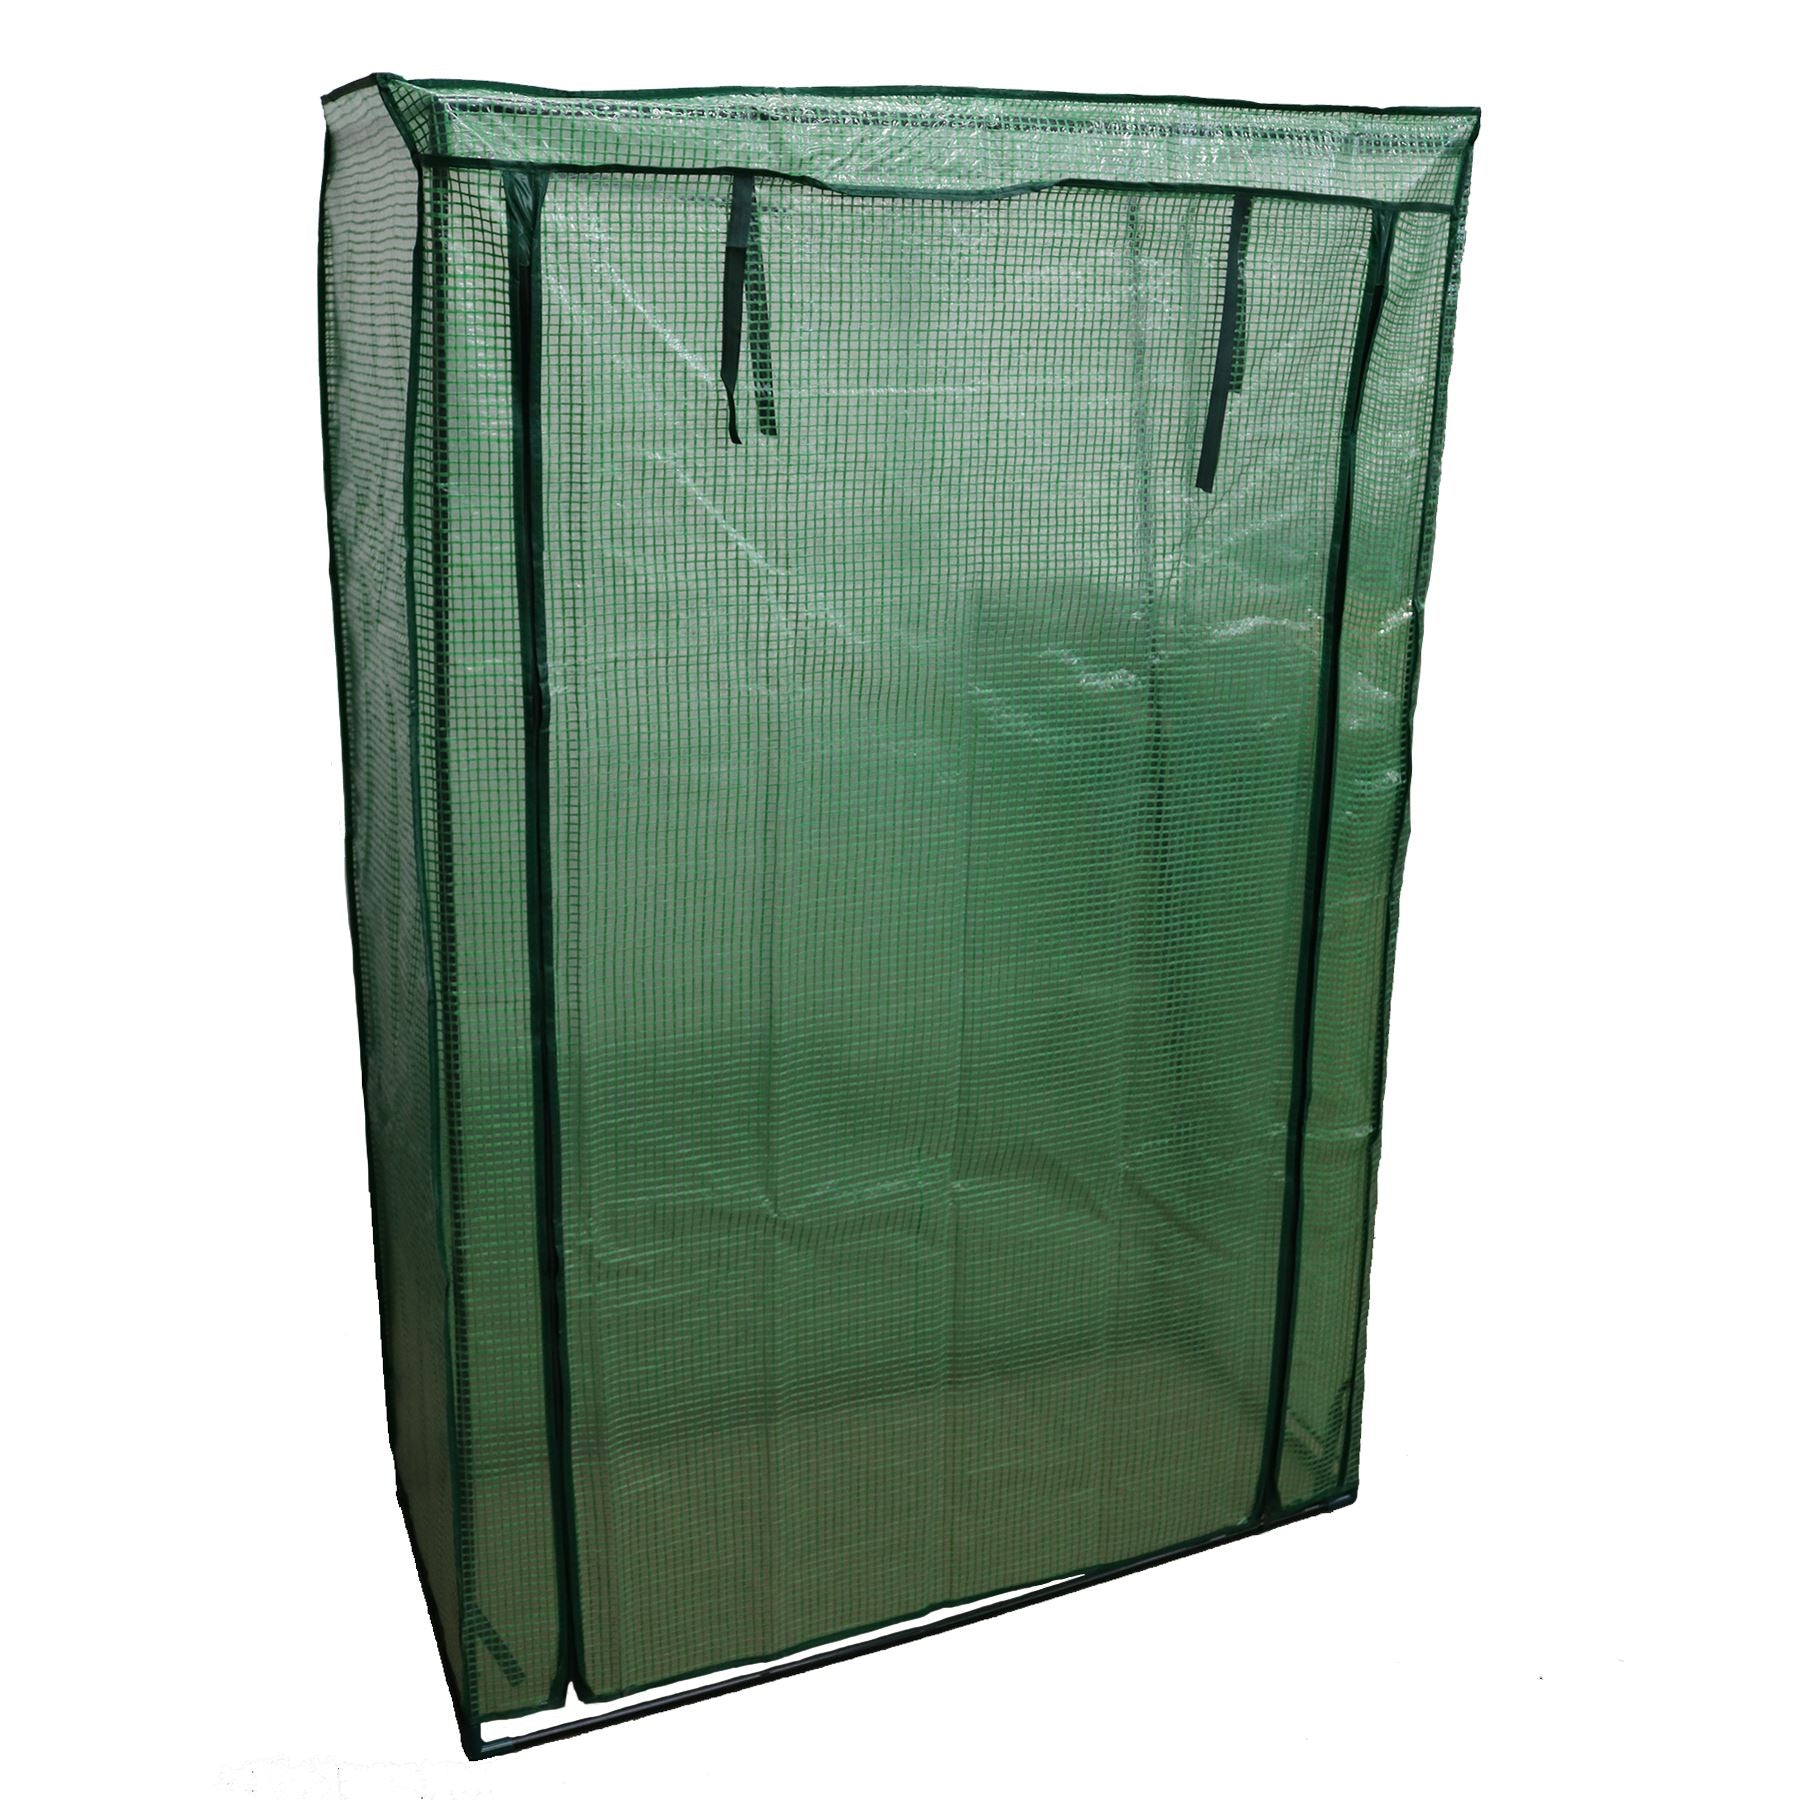 Outdoor Tomato Vegetable Plant Greenhouse Reinforced Frame Cover Grow House